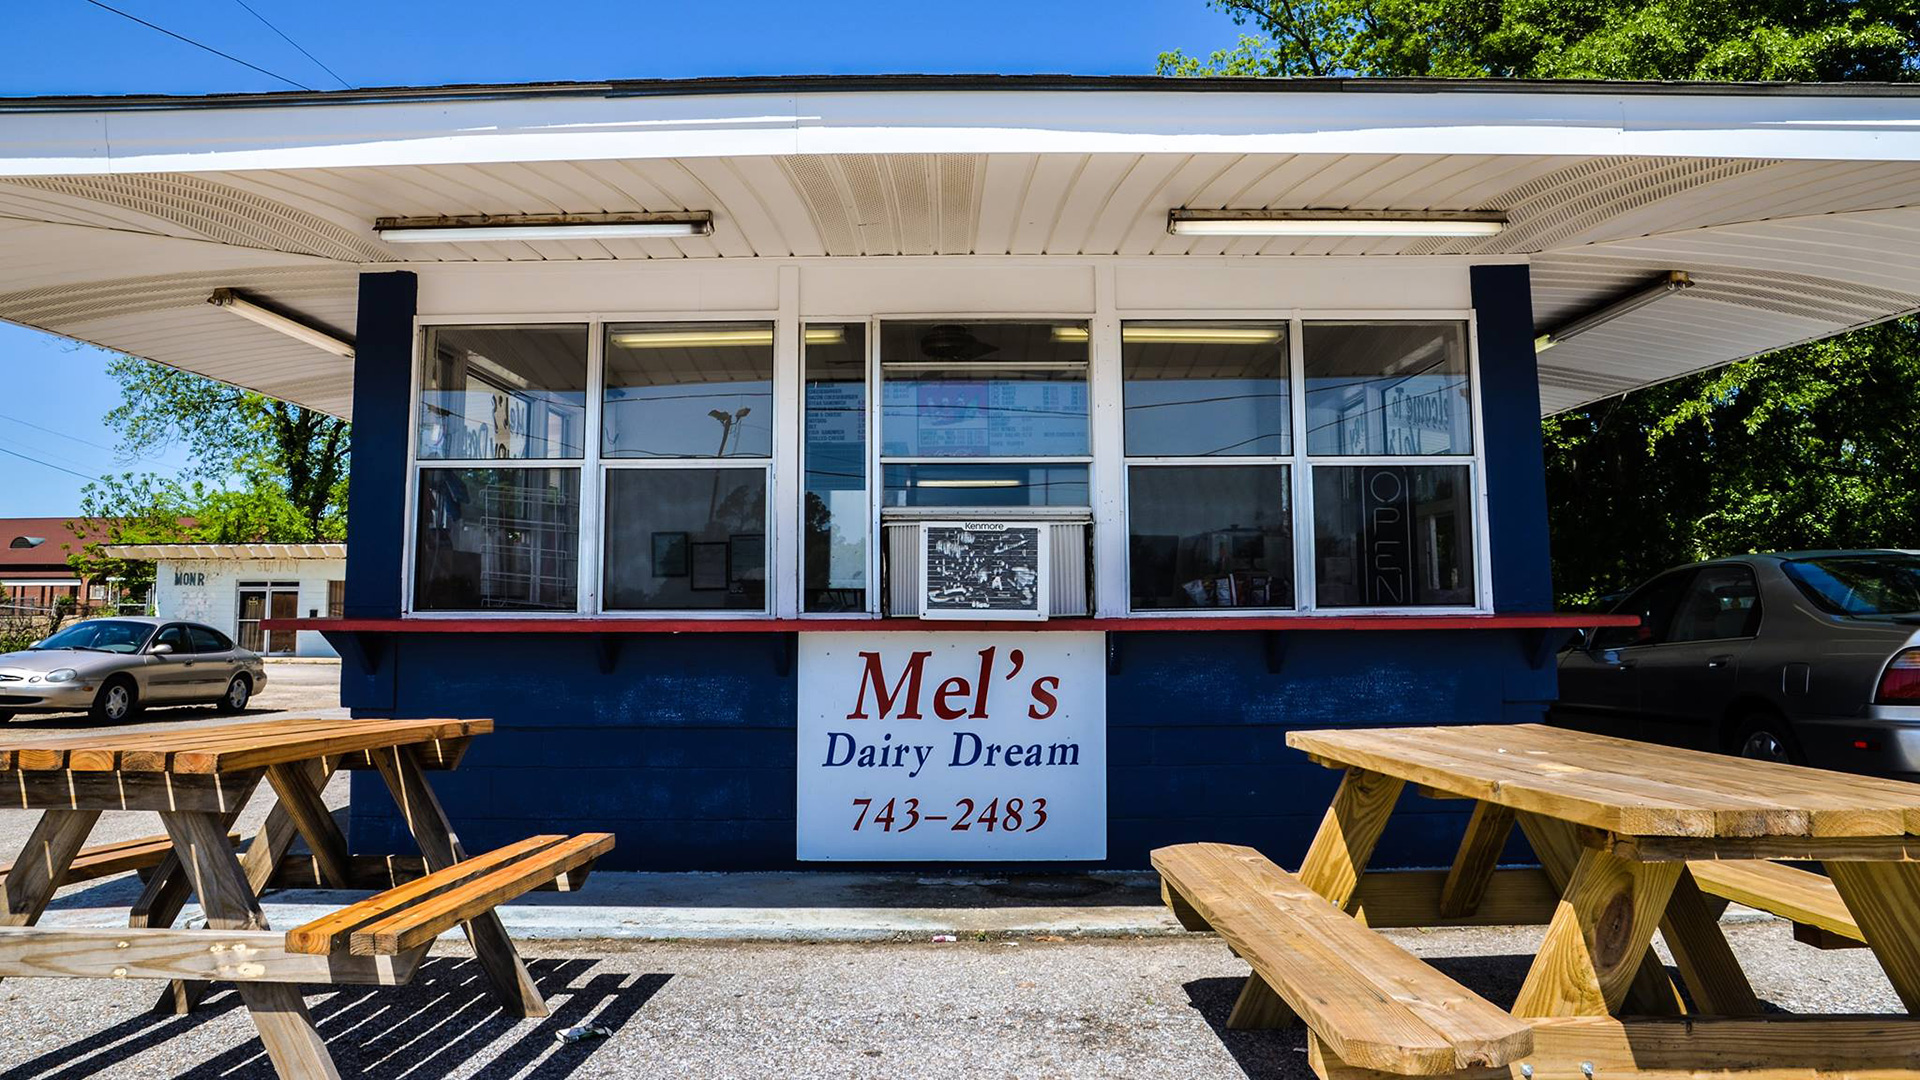 Mel's Dairy Dream now sits on the site of Harper Lee's childhood home in Monroeville.